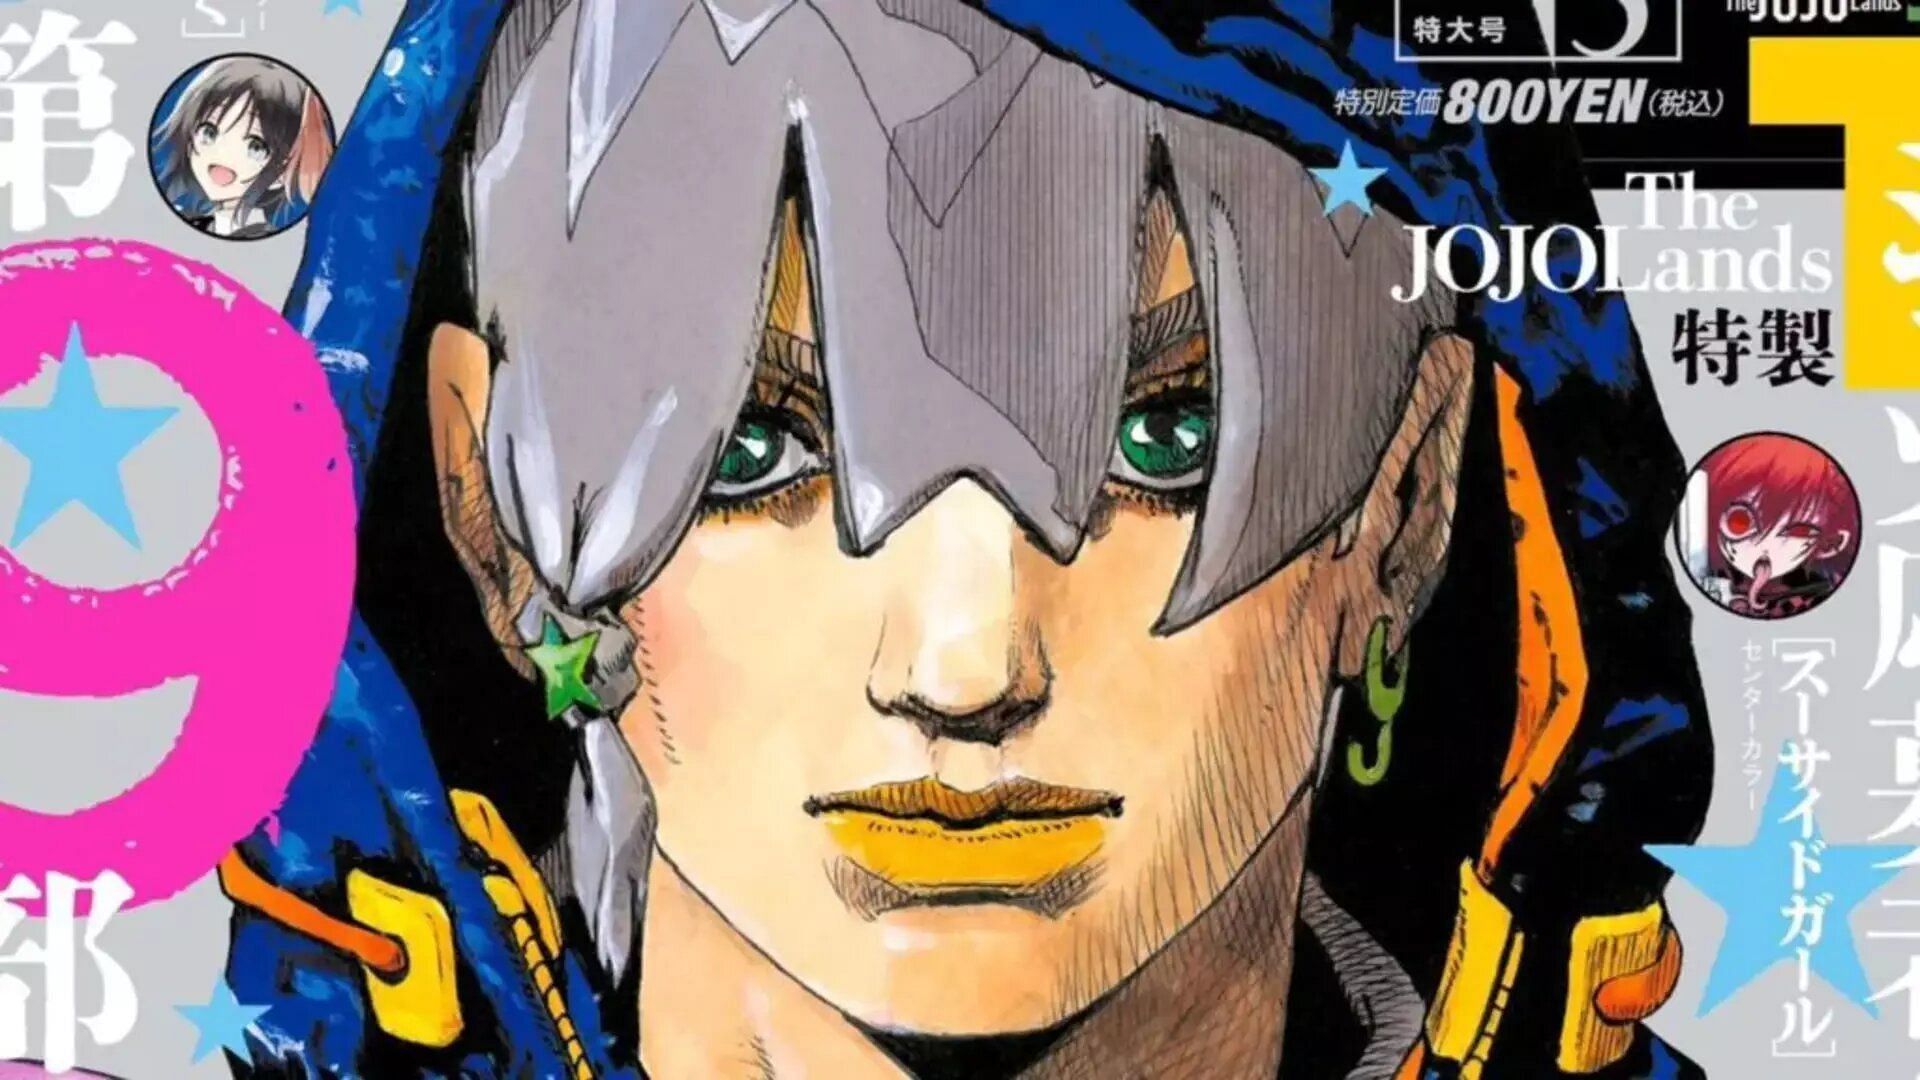 Jodio Joestar as seen in the colored promotional material for JoJoLands (Image via Shueisha)